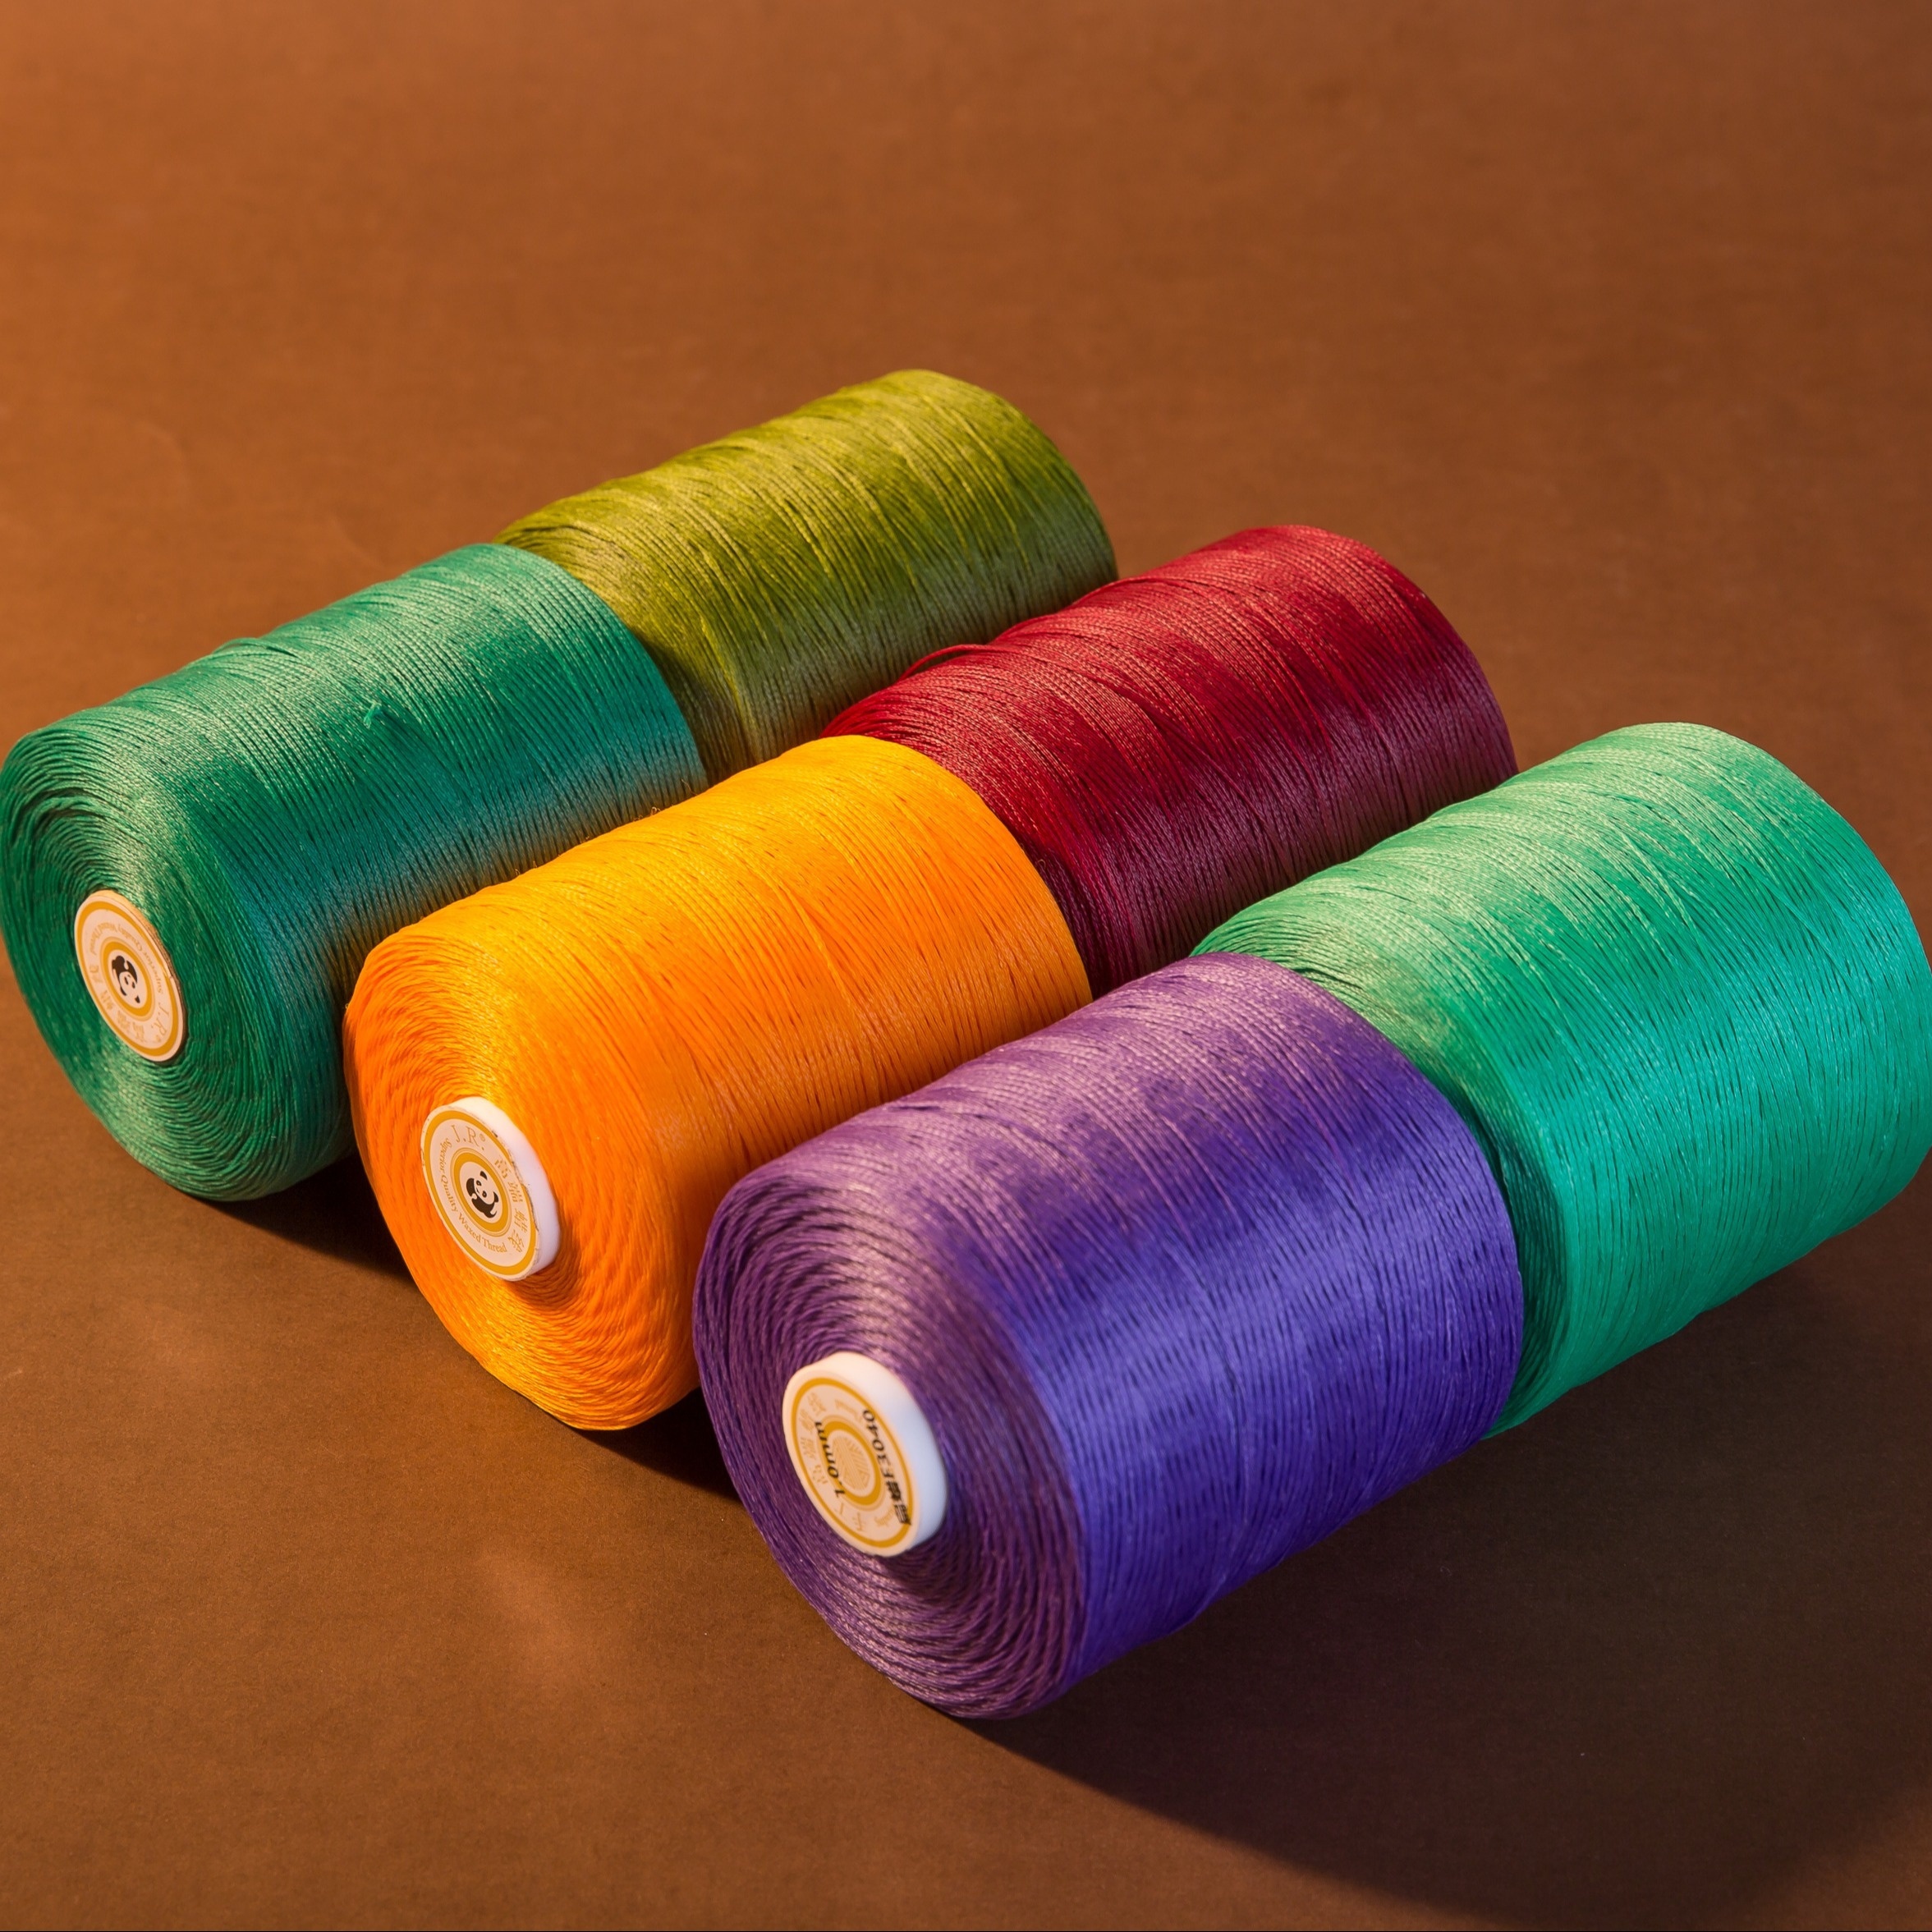 Wax Coated Thread, Wax Coating Sewing Waxed Thread 15 Colors Polyester  Material 15 Pcs DIY Making 50 Meters for Tents